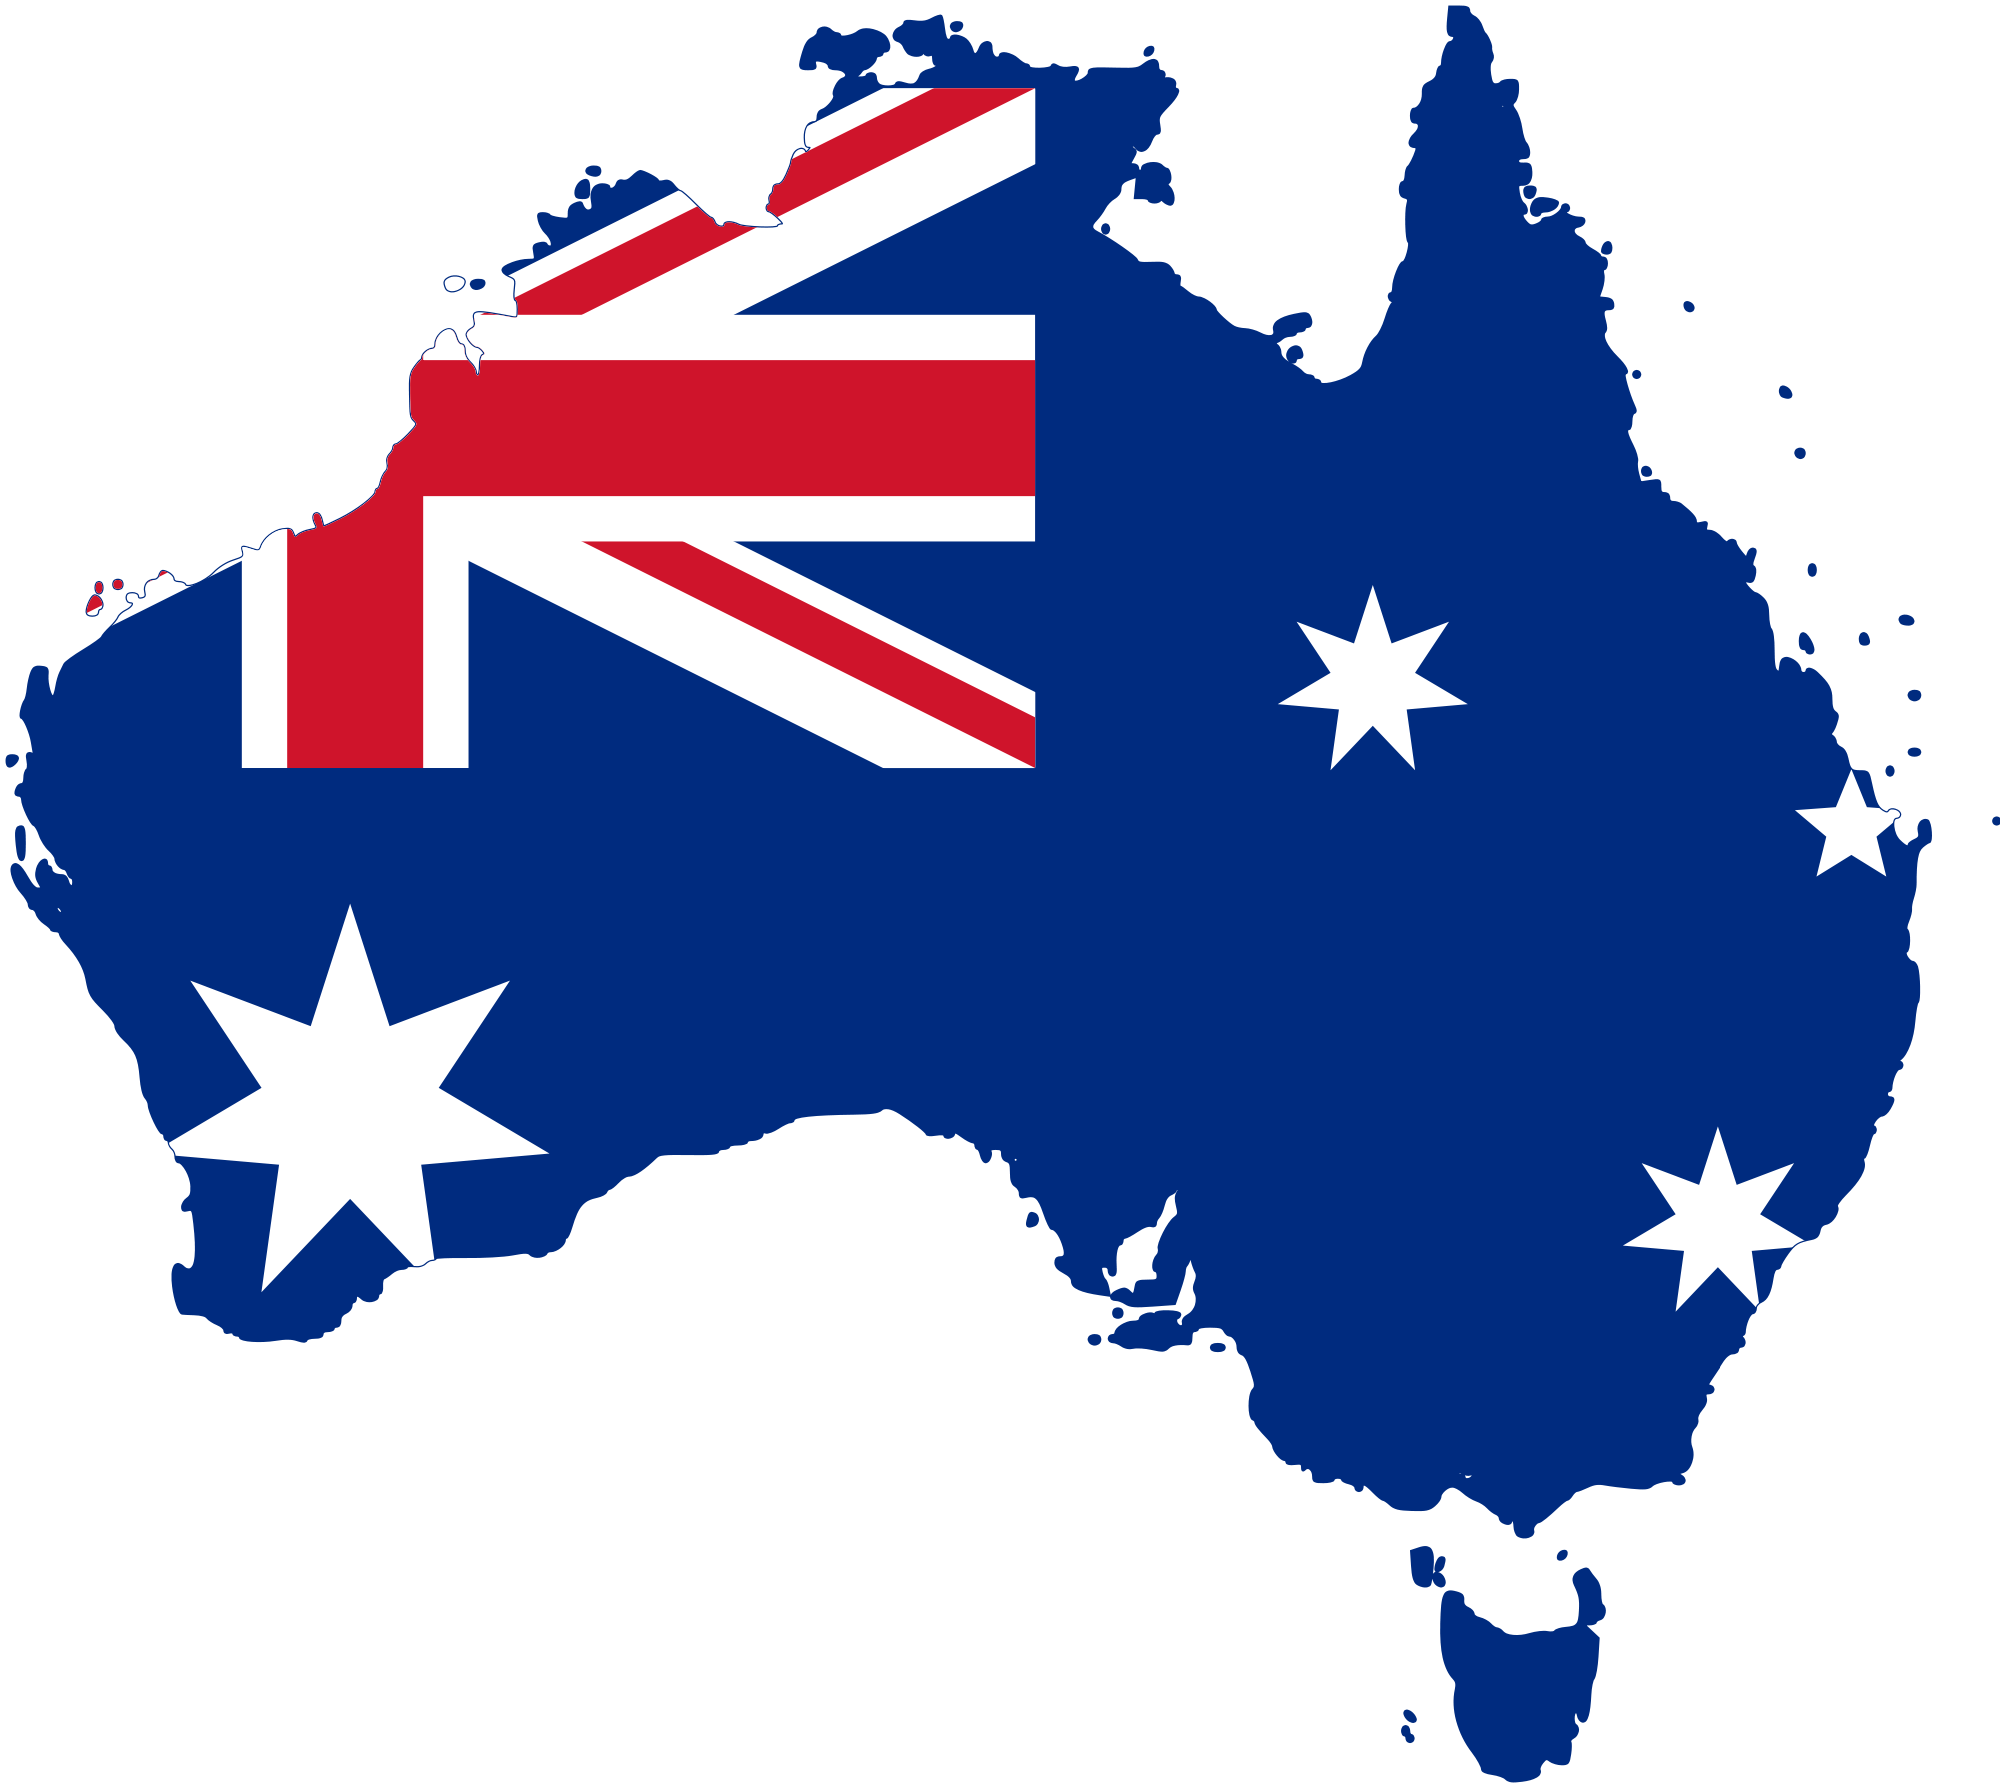 Australian Immigration: All About Immigration to Australia